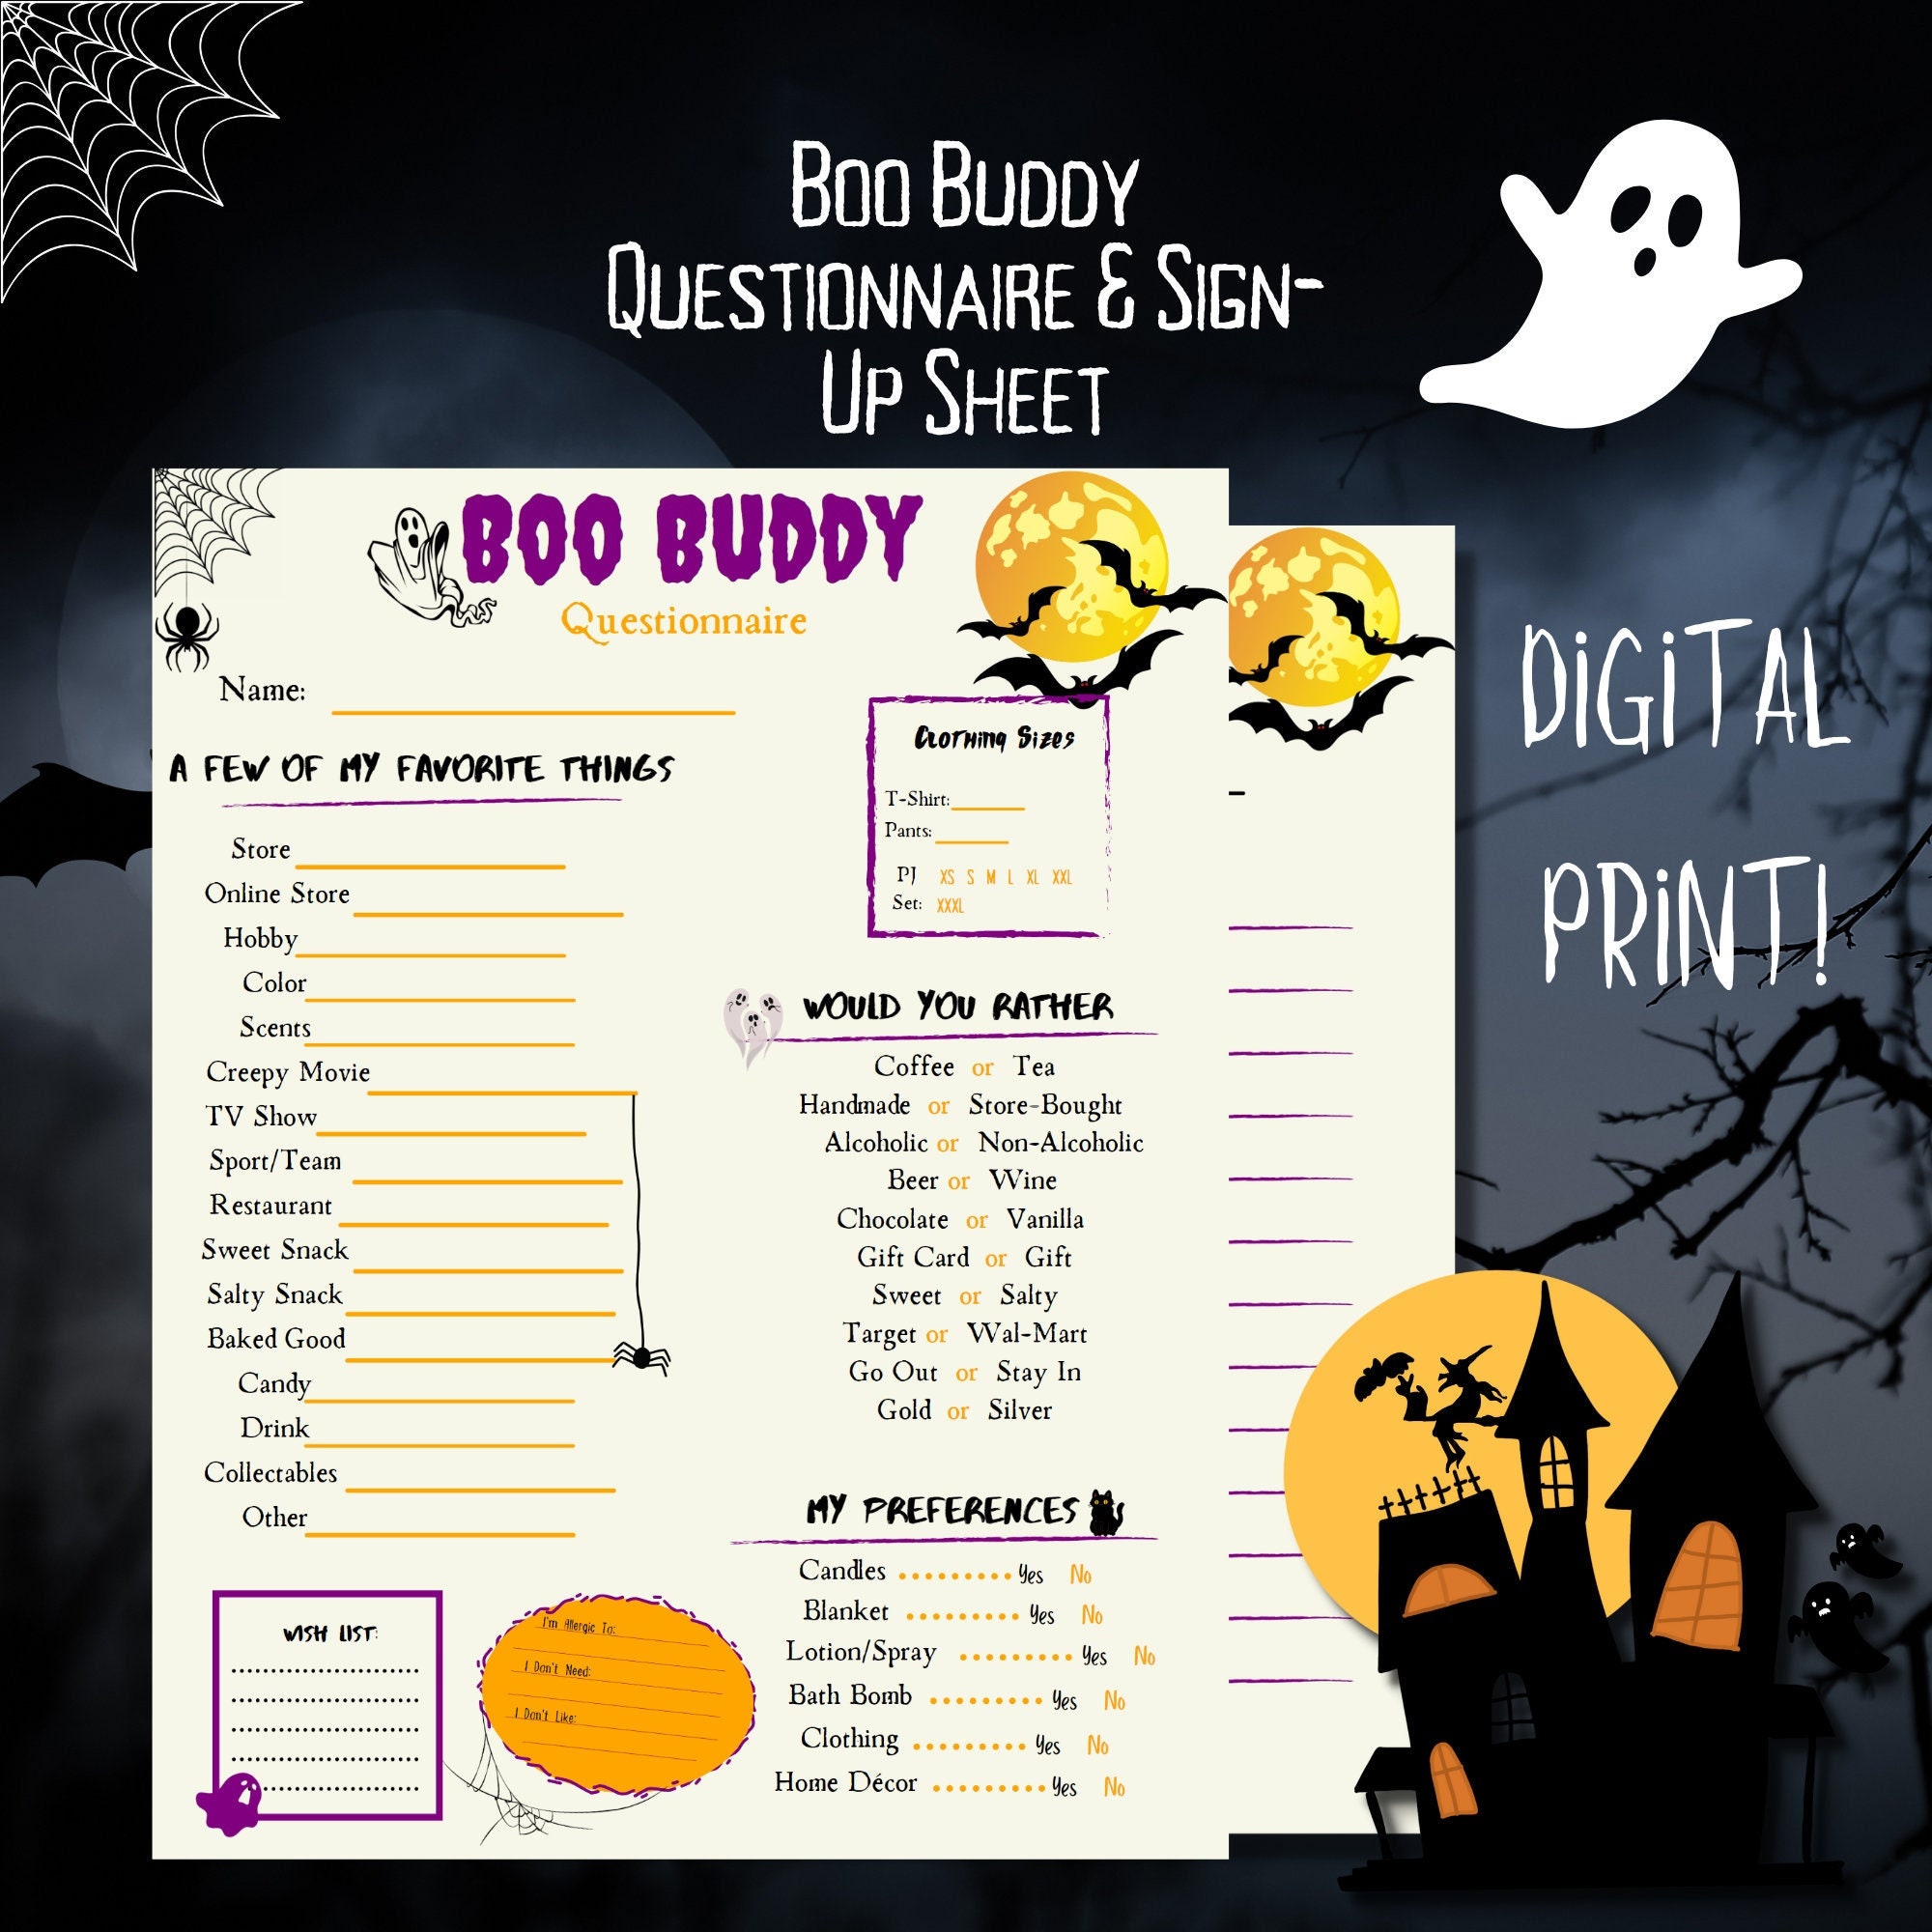 Boo Buddy Questionnaire Gift Exchange Questionnaire Halloween Sign up Sheet Printable